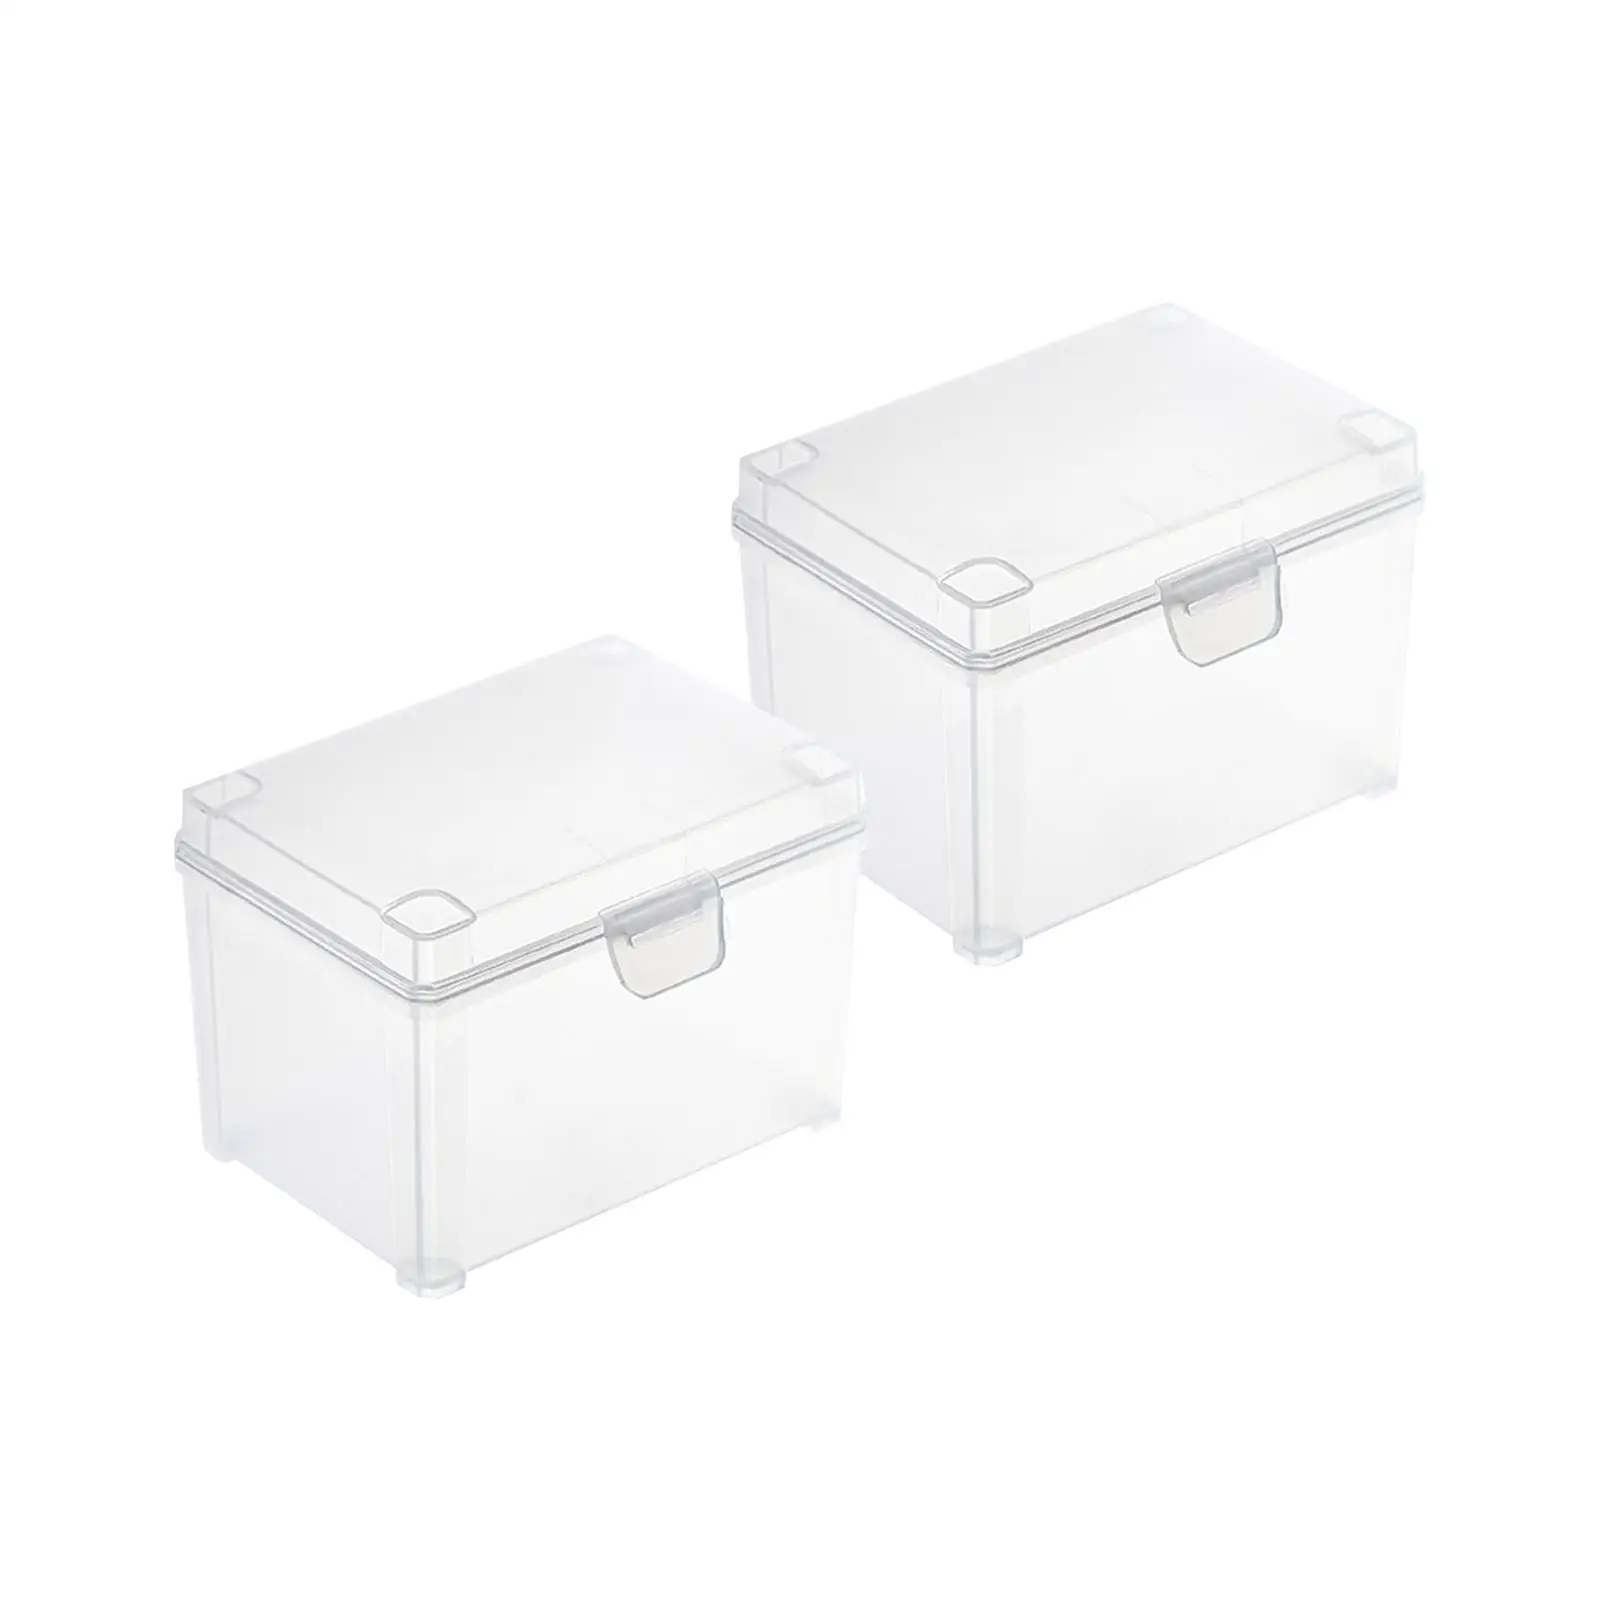 2Pcs Small Items Organizer PP 9.5x6.3x6.5cm Rectangle Cards Storage Cases for Collecting Small Items Clips Jewelry Office Home